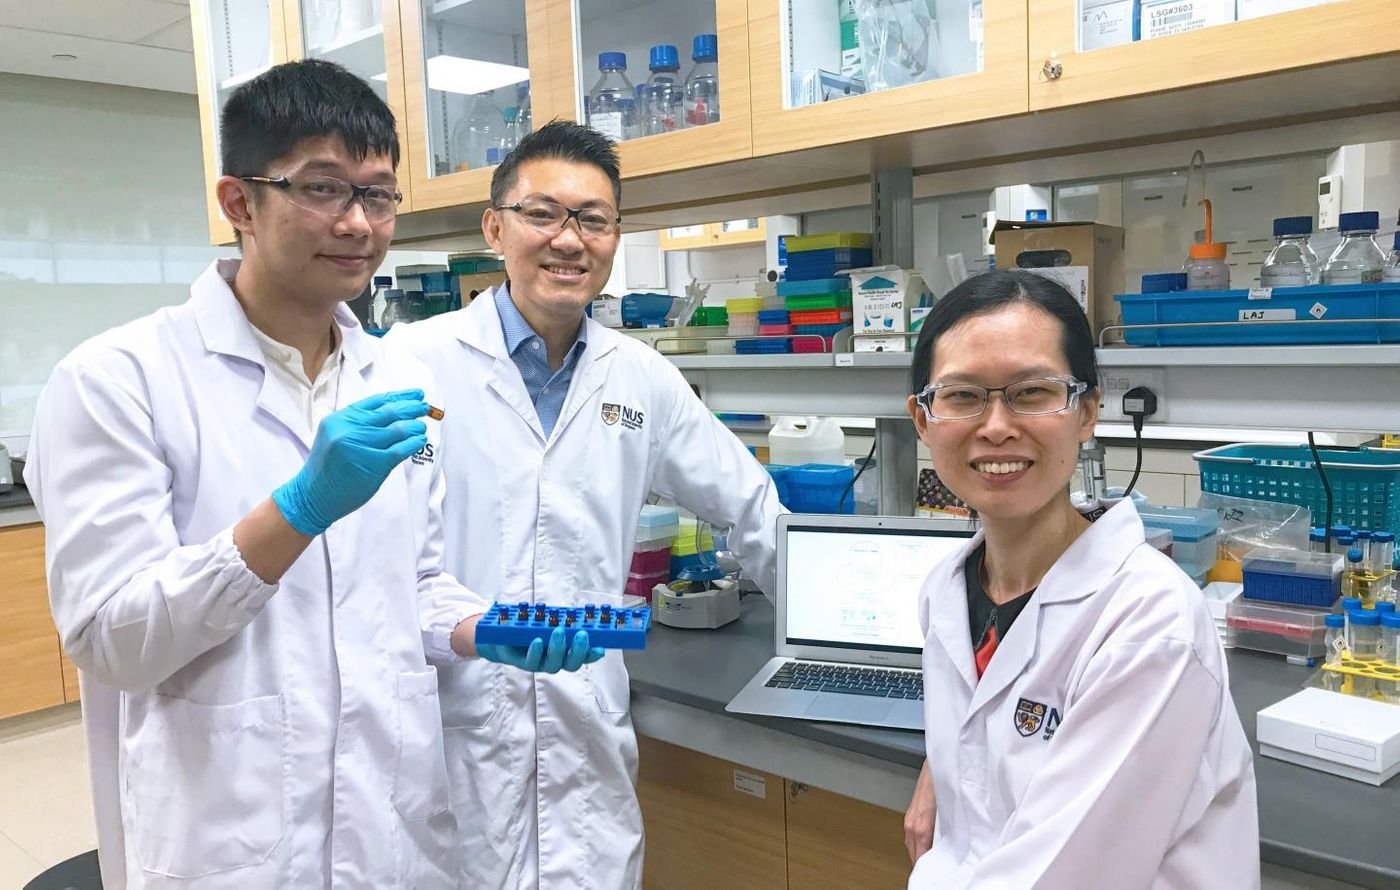 Mr. Toh Yi Long, Associate Professor Alexandre Chan and Assistant Professor Lau Aik Jiang are members of the team that found clinically relevant factors which predispose patients to chemobrain. / Credit: National University of Singapore